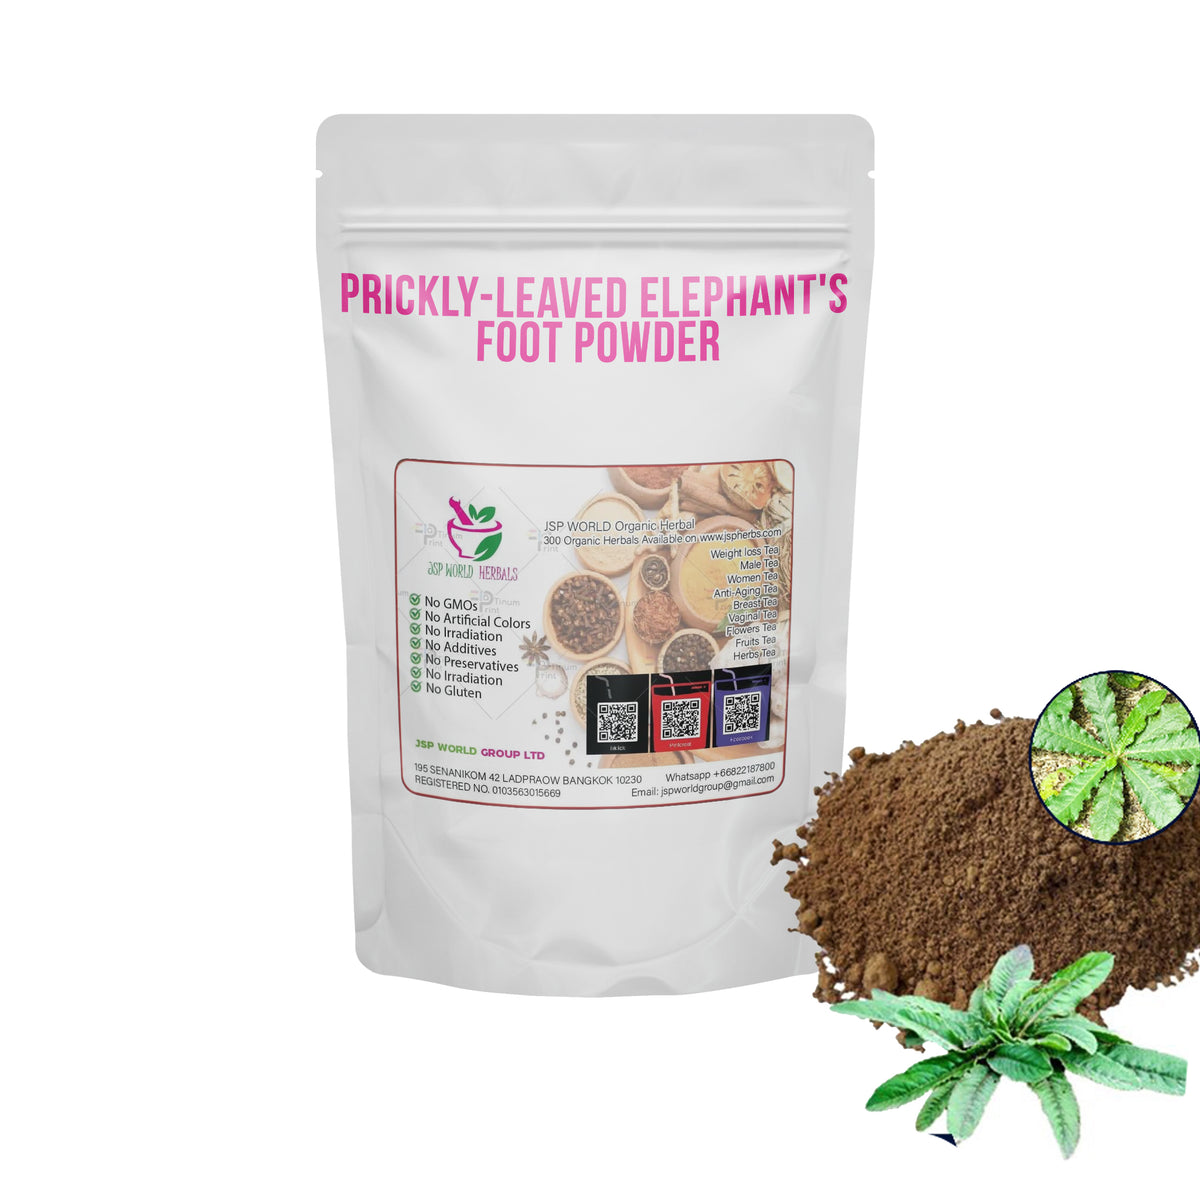 Prickly-leaved elephant's foot Powder 100 Grams 100% Organic Authenic